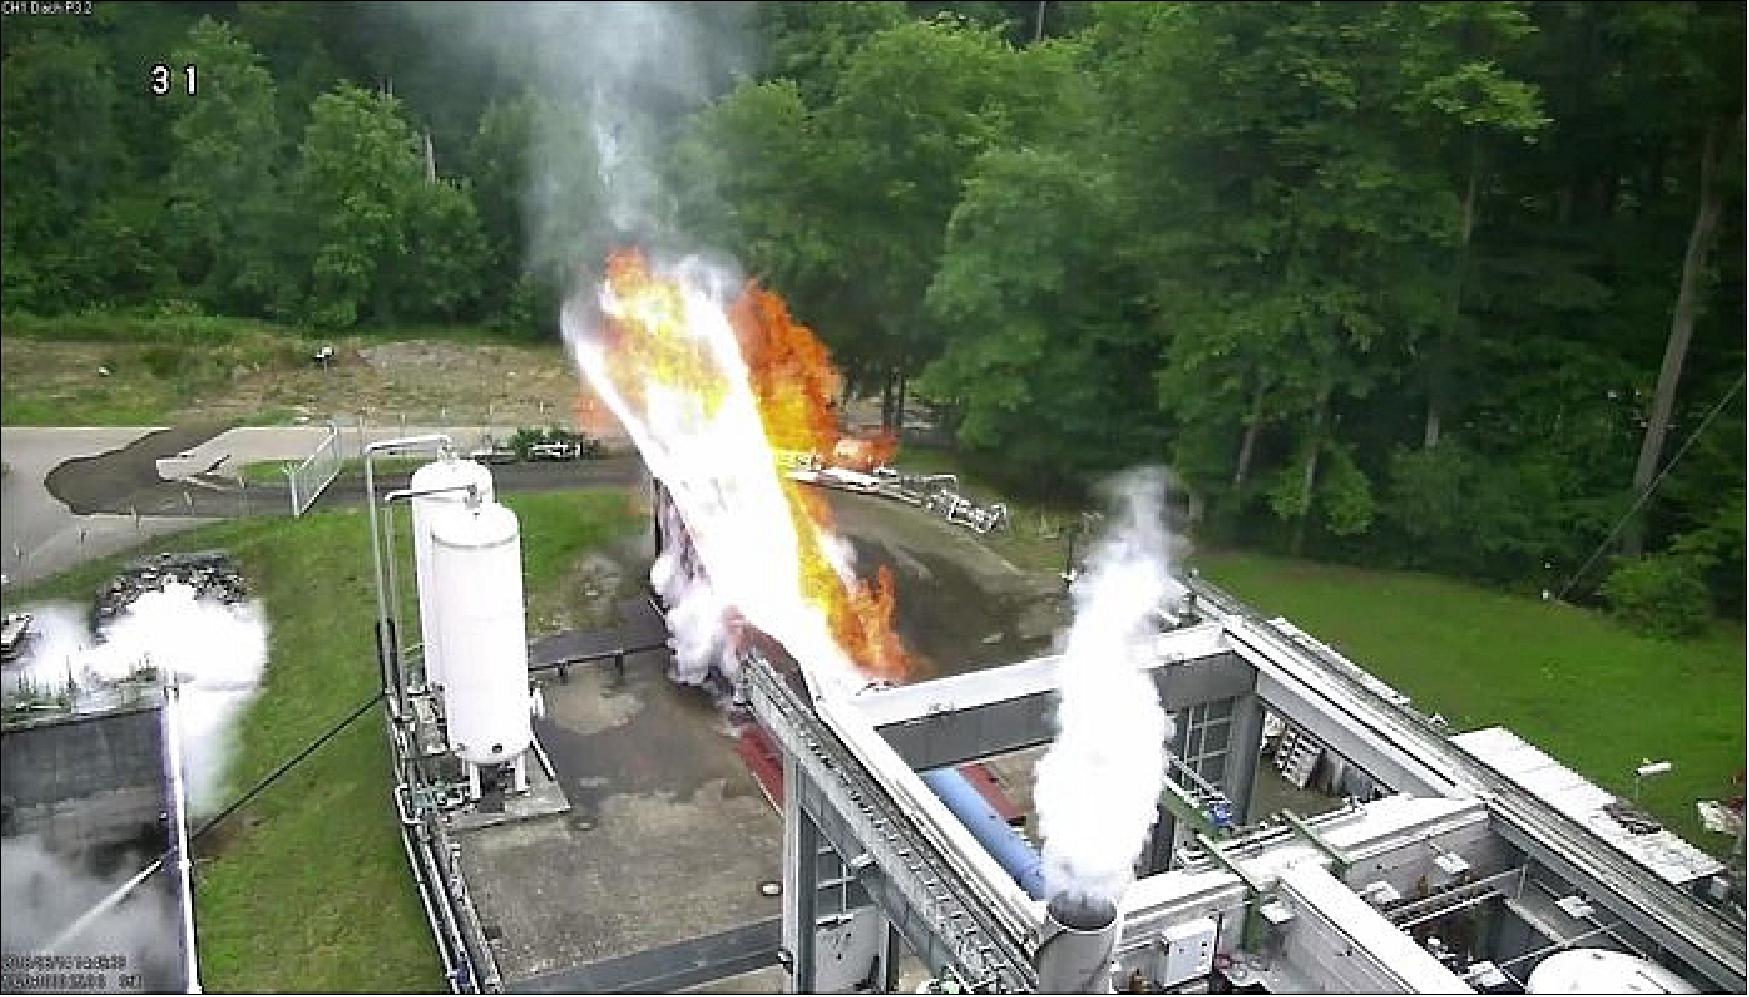 Figure 114: An engine technology demonstrator was integrated in the P3.2 vacuum chamber at the DLR German Aerospace Center test facility in Lampoldshausen for a first hot fire test on 14 June 2018. This was the first in a series of planned tests guiding Europe’s next-generation upper-stage rocket engine design (image credit: DLR / ArianeGroup)